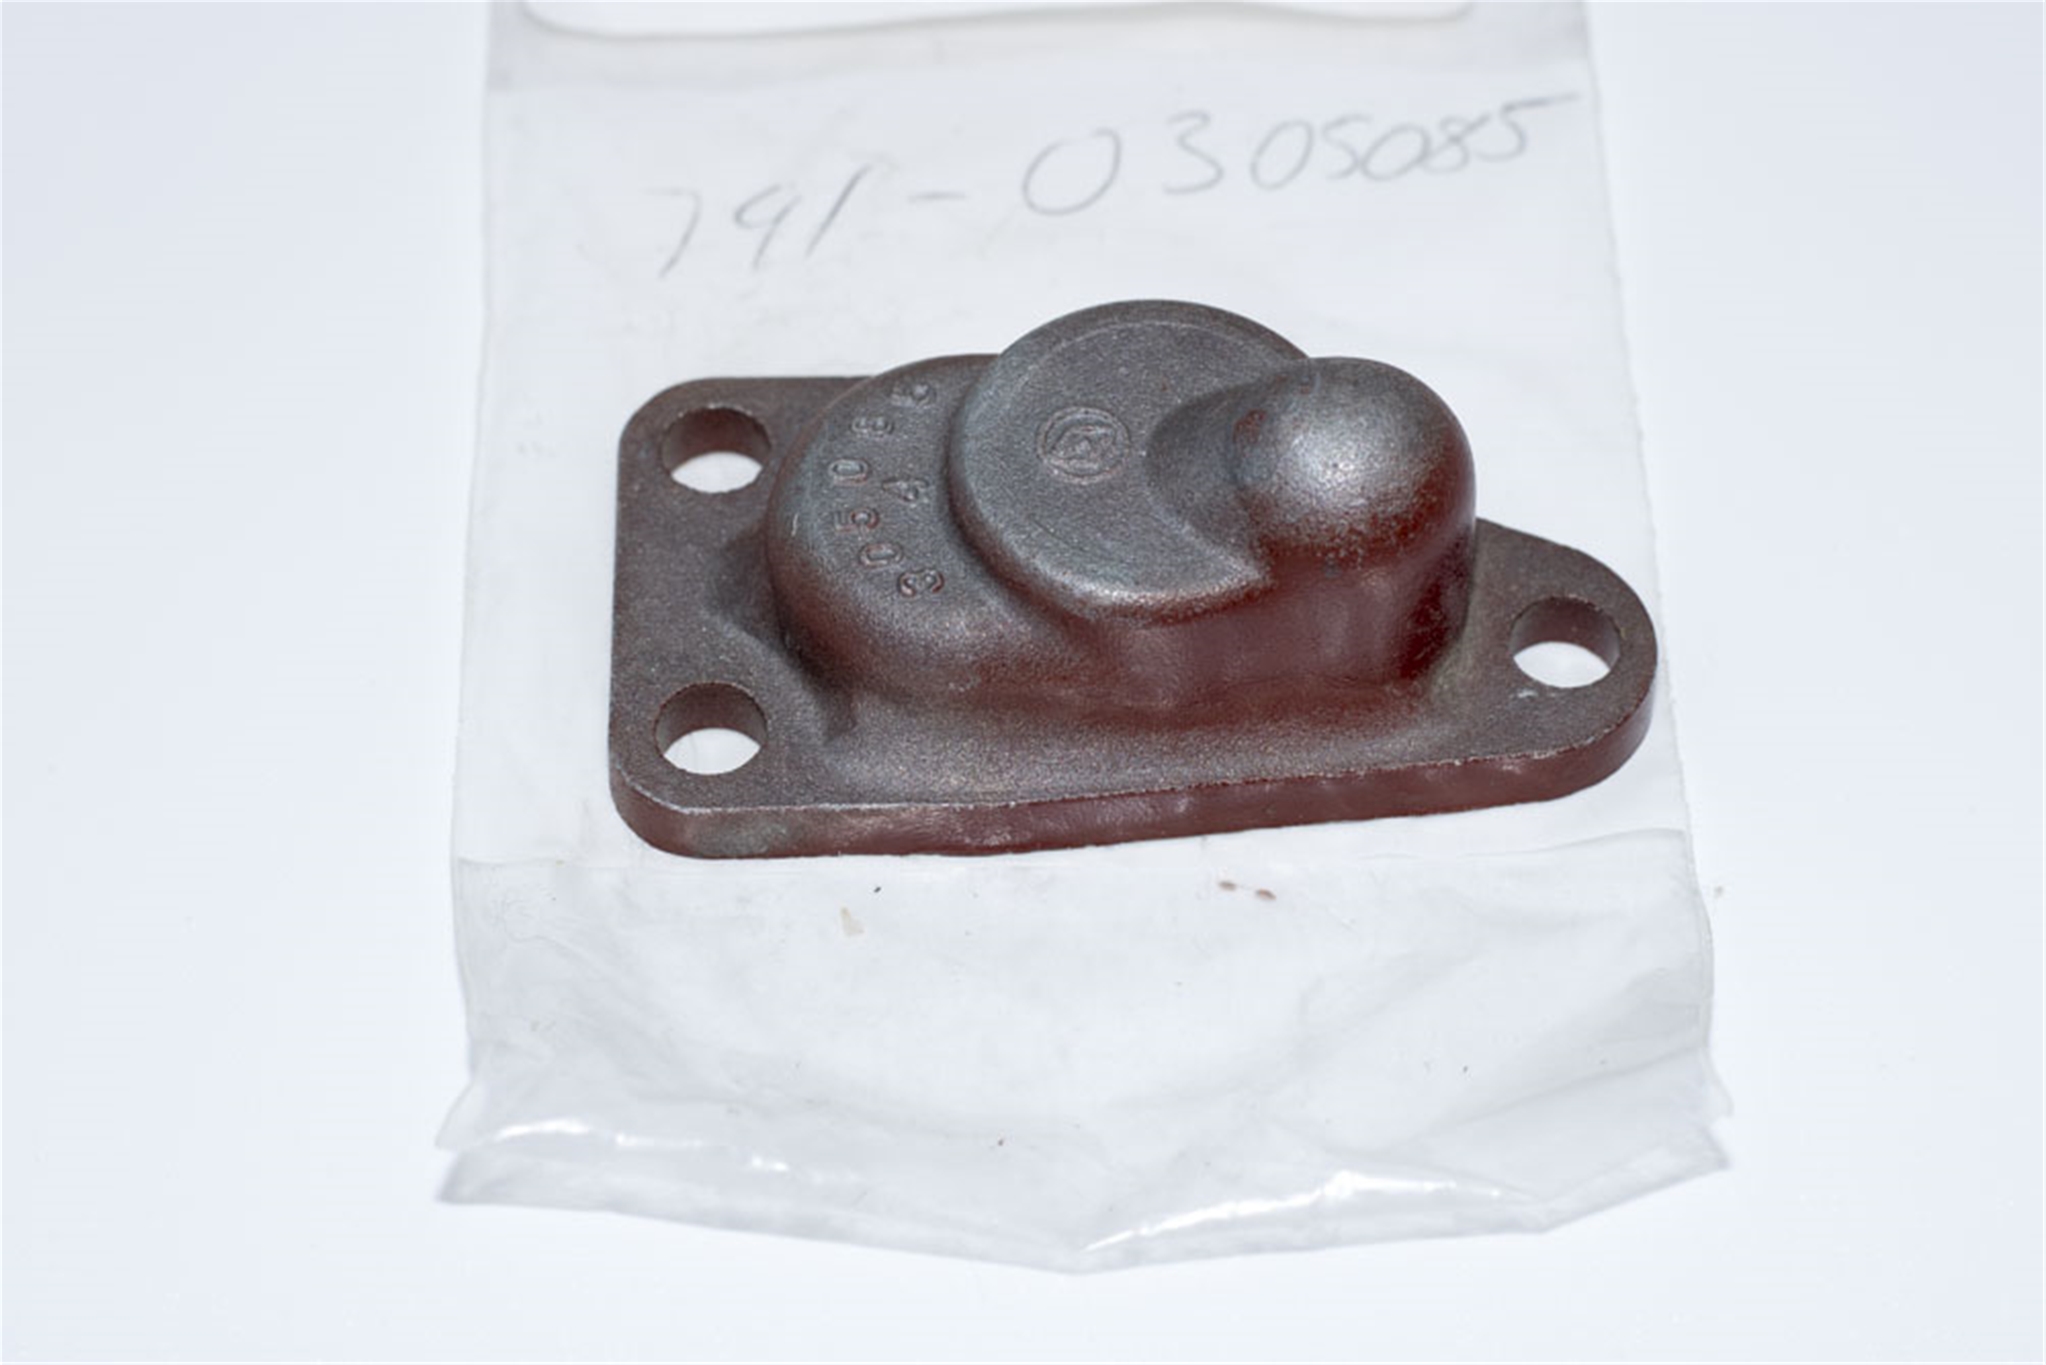 305085 Thermostat Hsg Cover